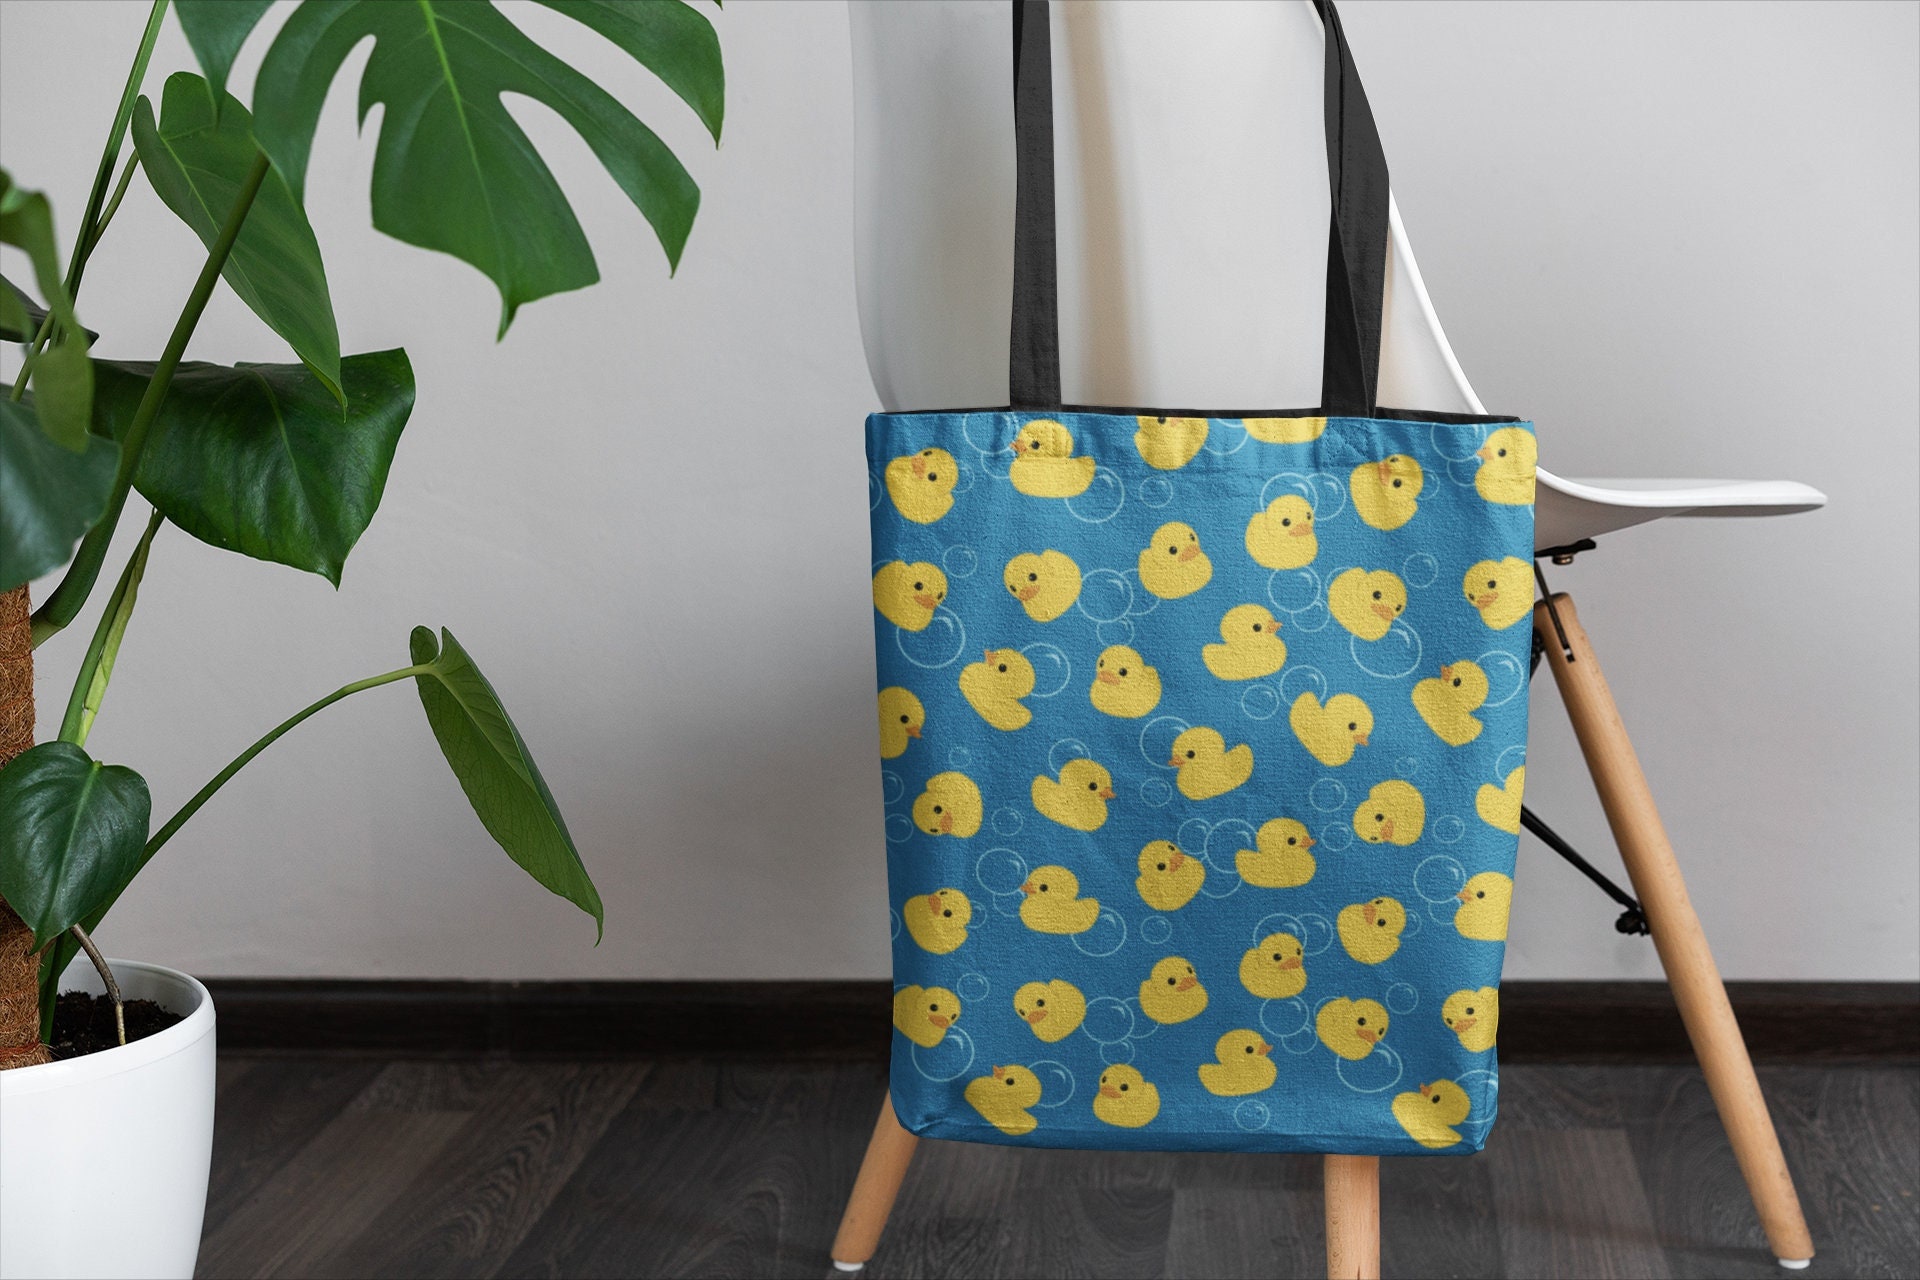 LANBAIHE You've Been Ducked, Duck Duck Tote Bag, Purse for Duck lovers, Yellow Duck Carrying Sack, Rubber Ducks Bag, Ducking Tote Bags, Natural